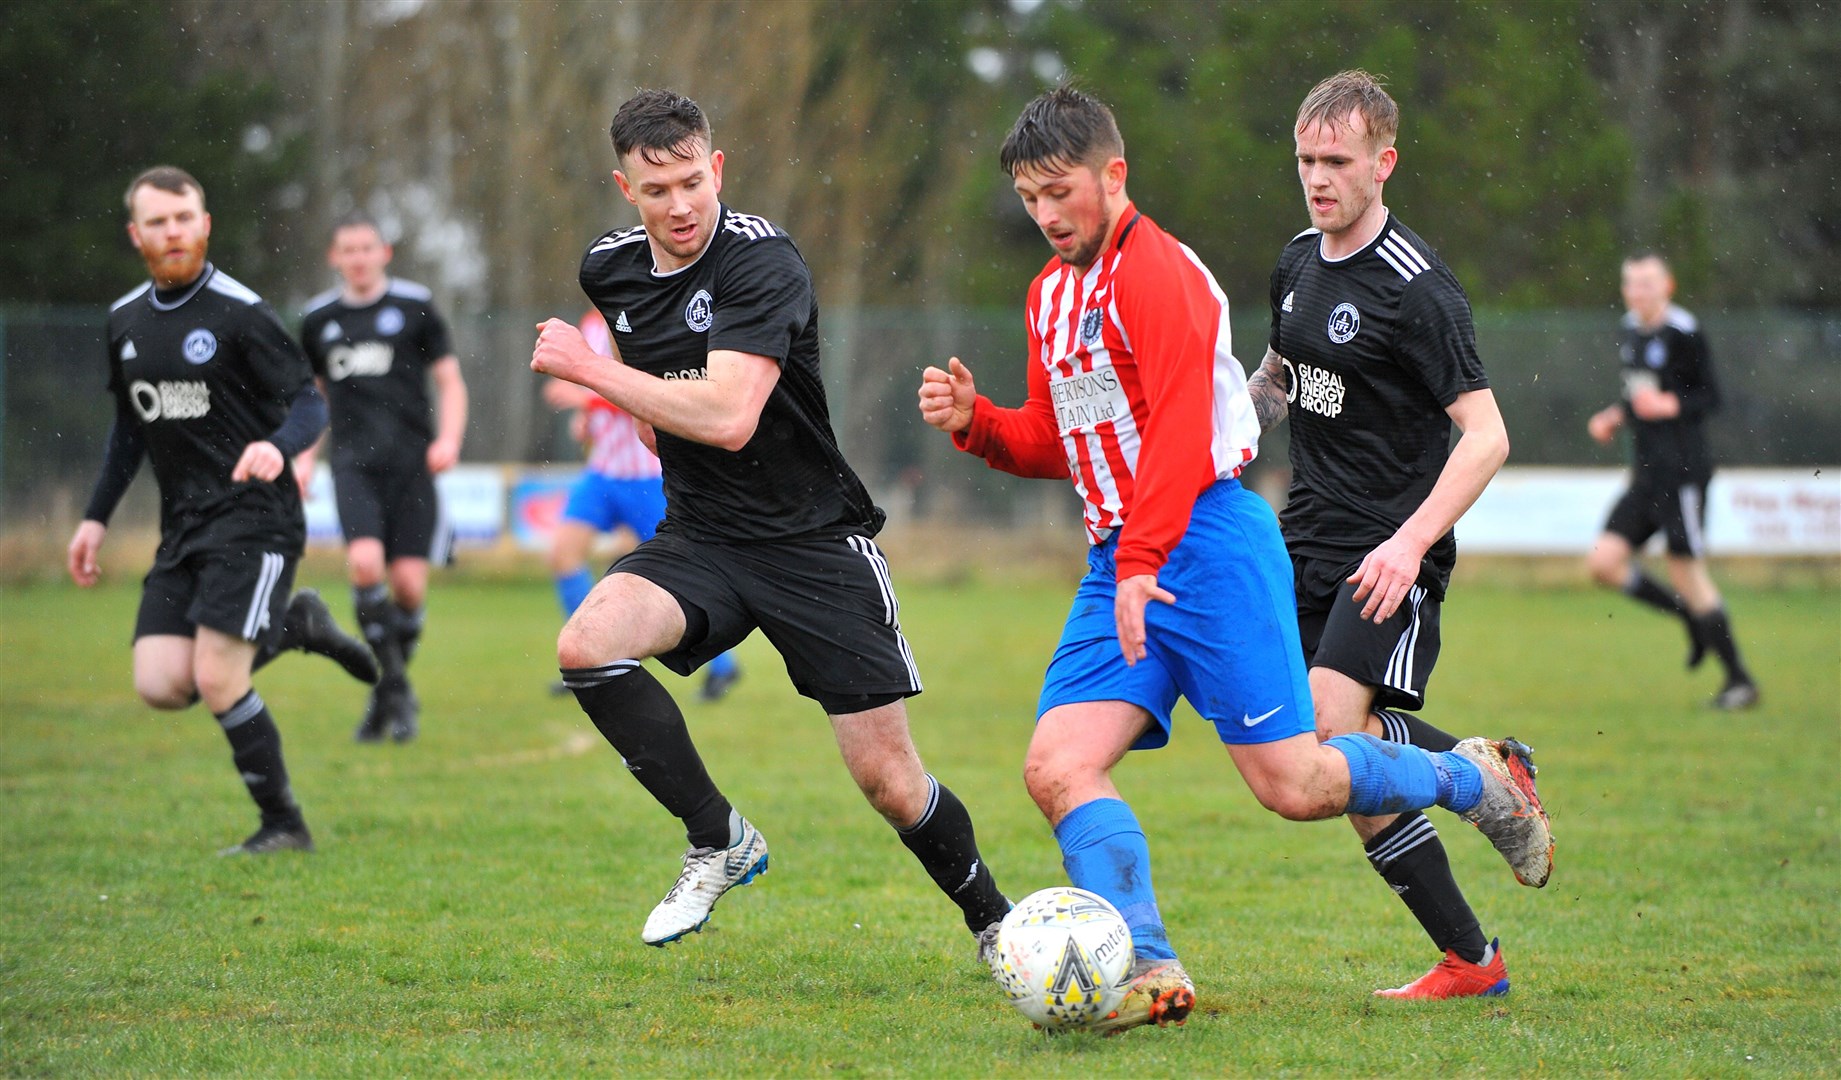 Saints's Jake Locket is crowded out by Invergordon players. Picture: Graeme Webster